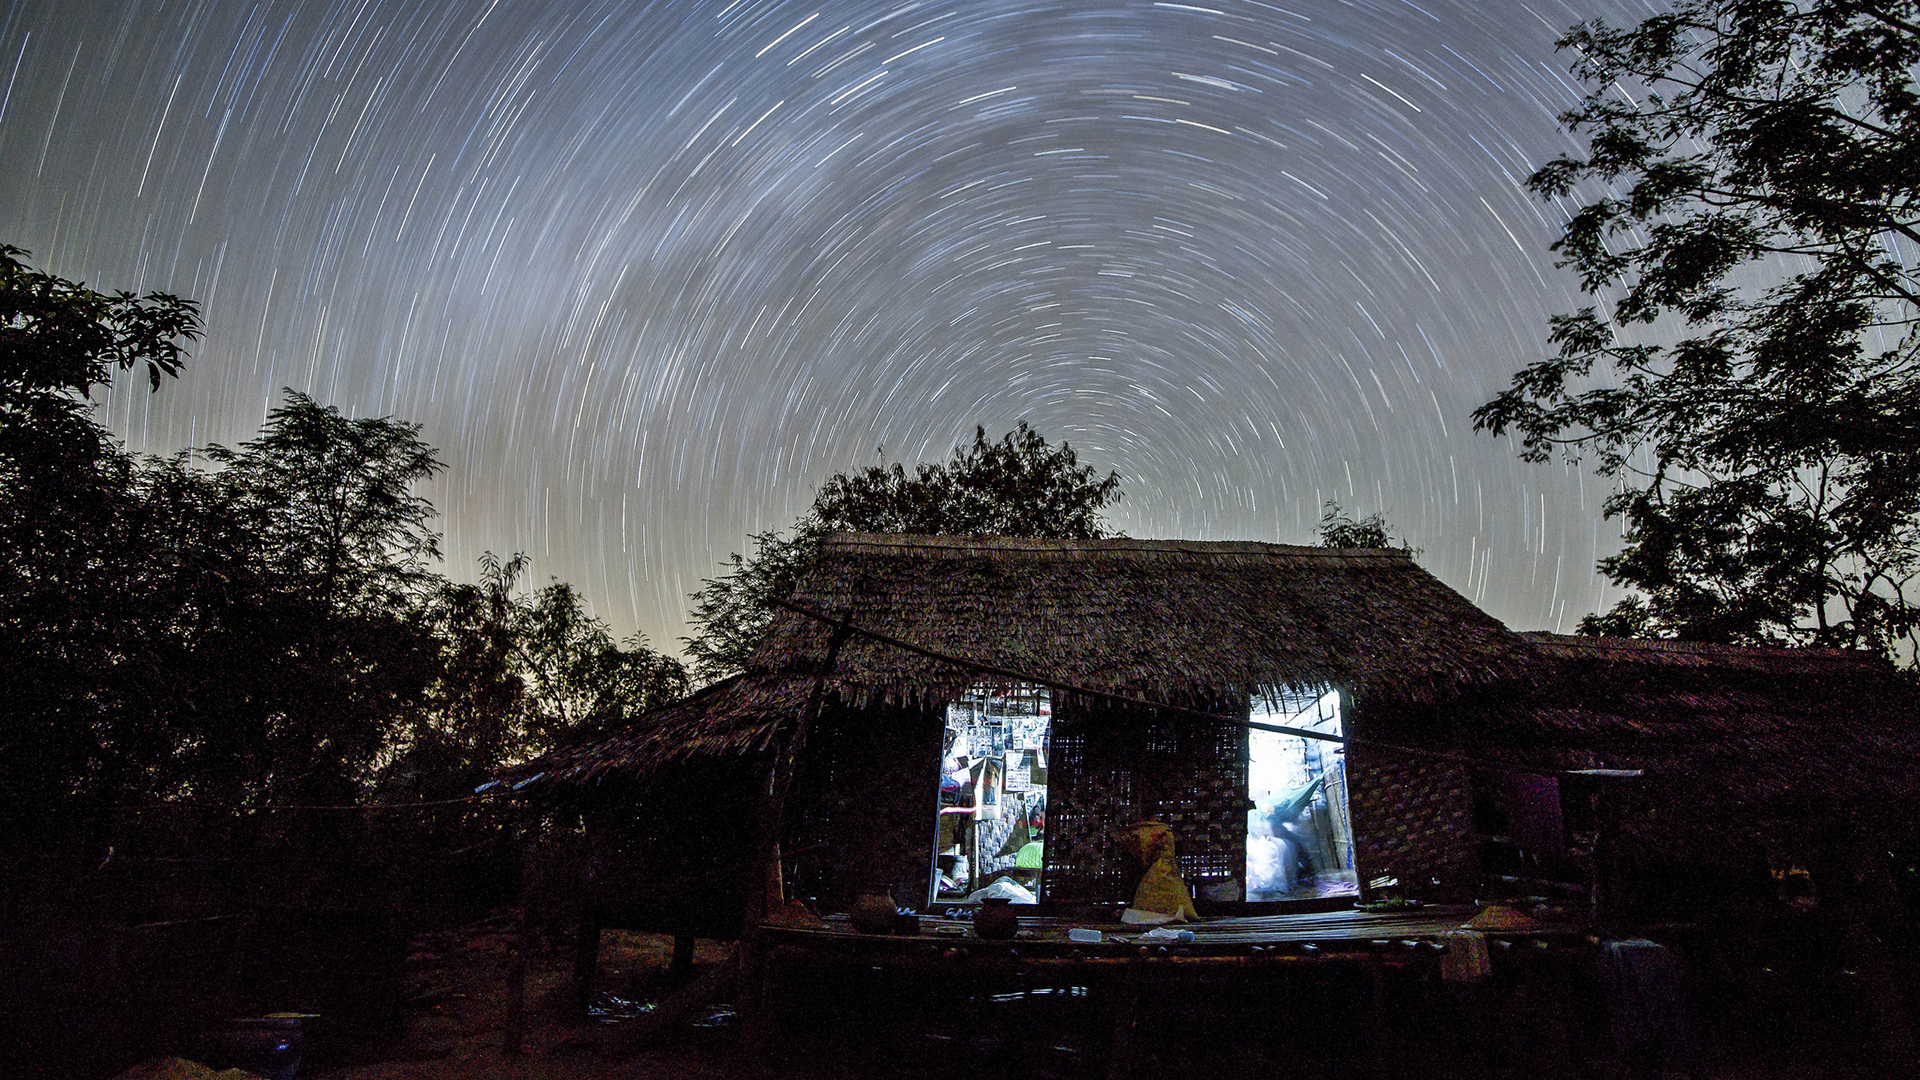 Hut And Trees With Wallpaper Of Star Trails 2K Space